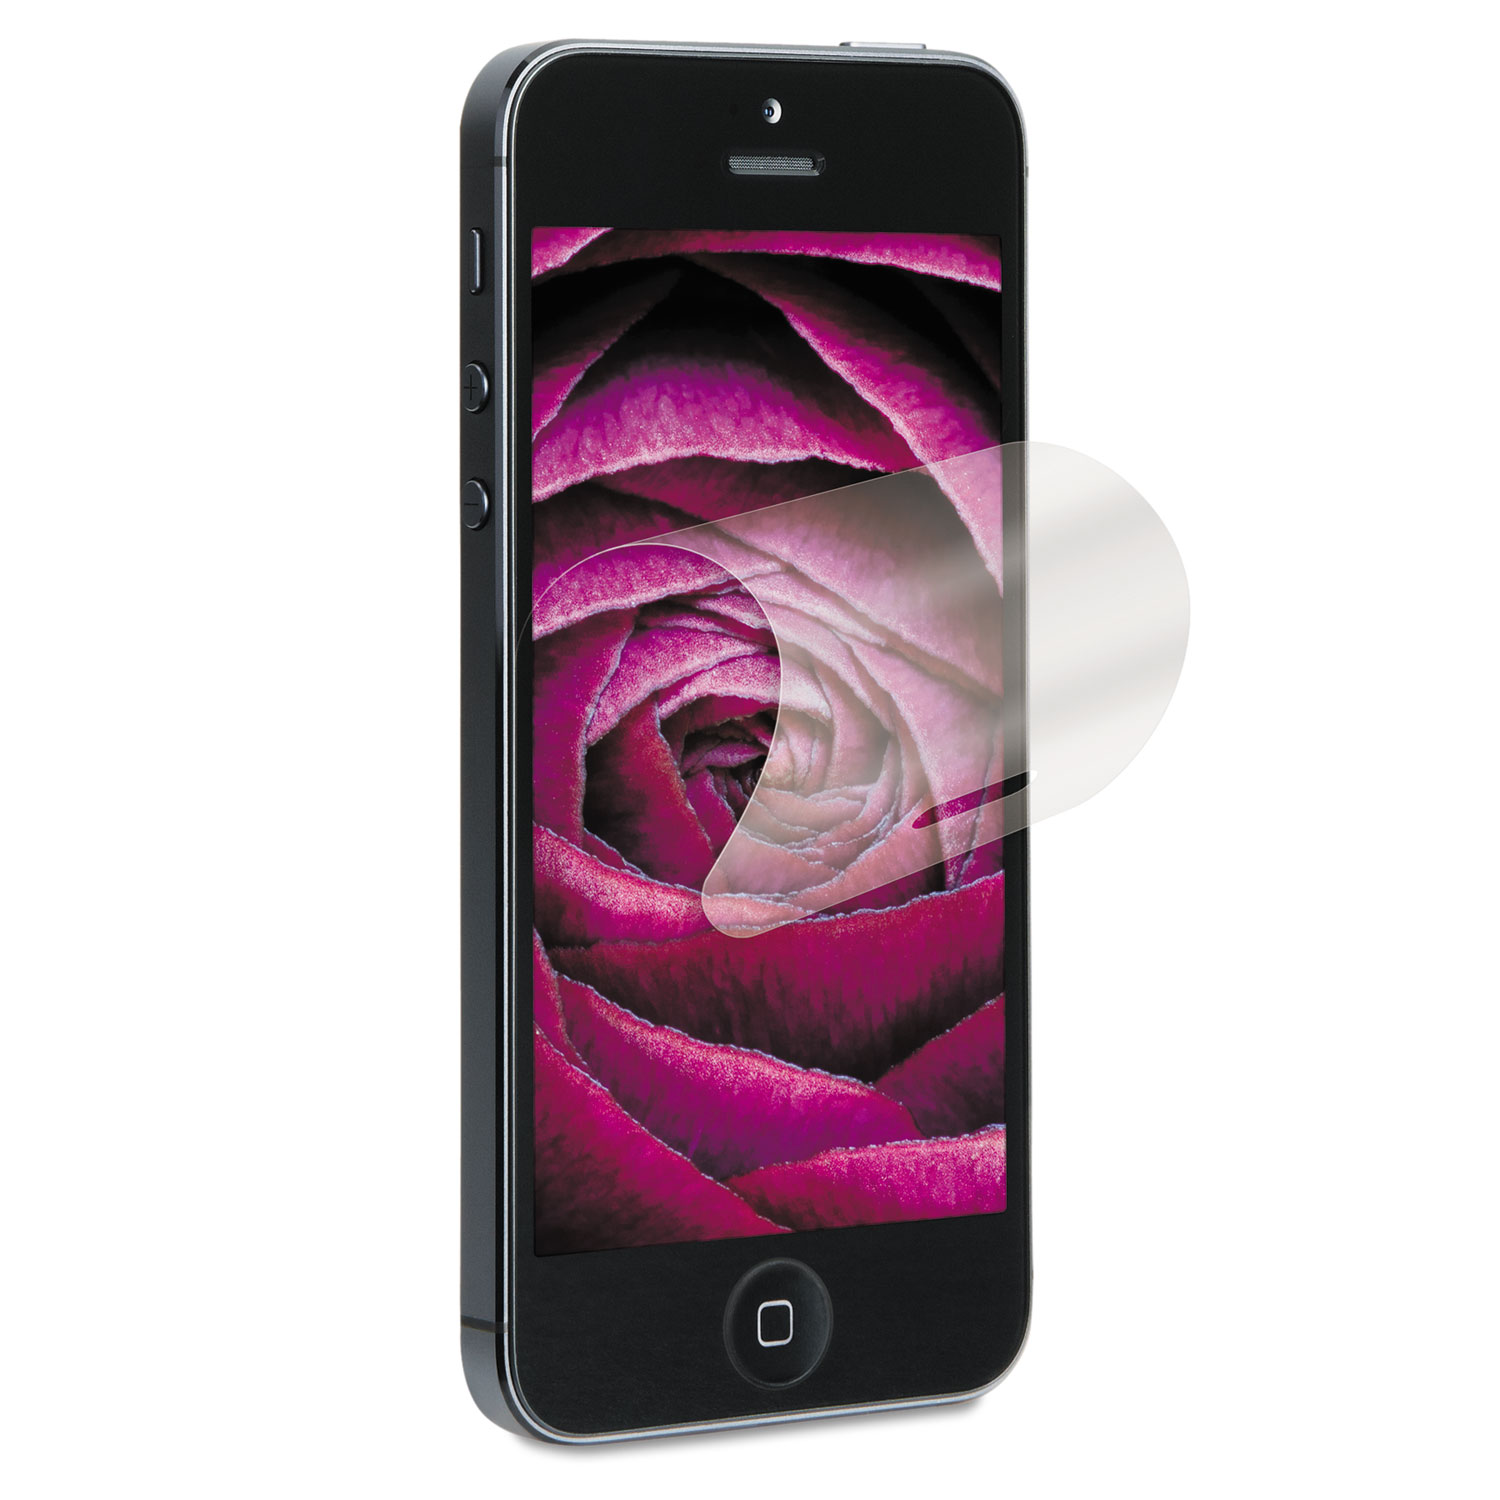 Natural View Screen Protection Film for iPhone 5